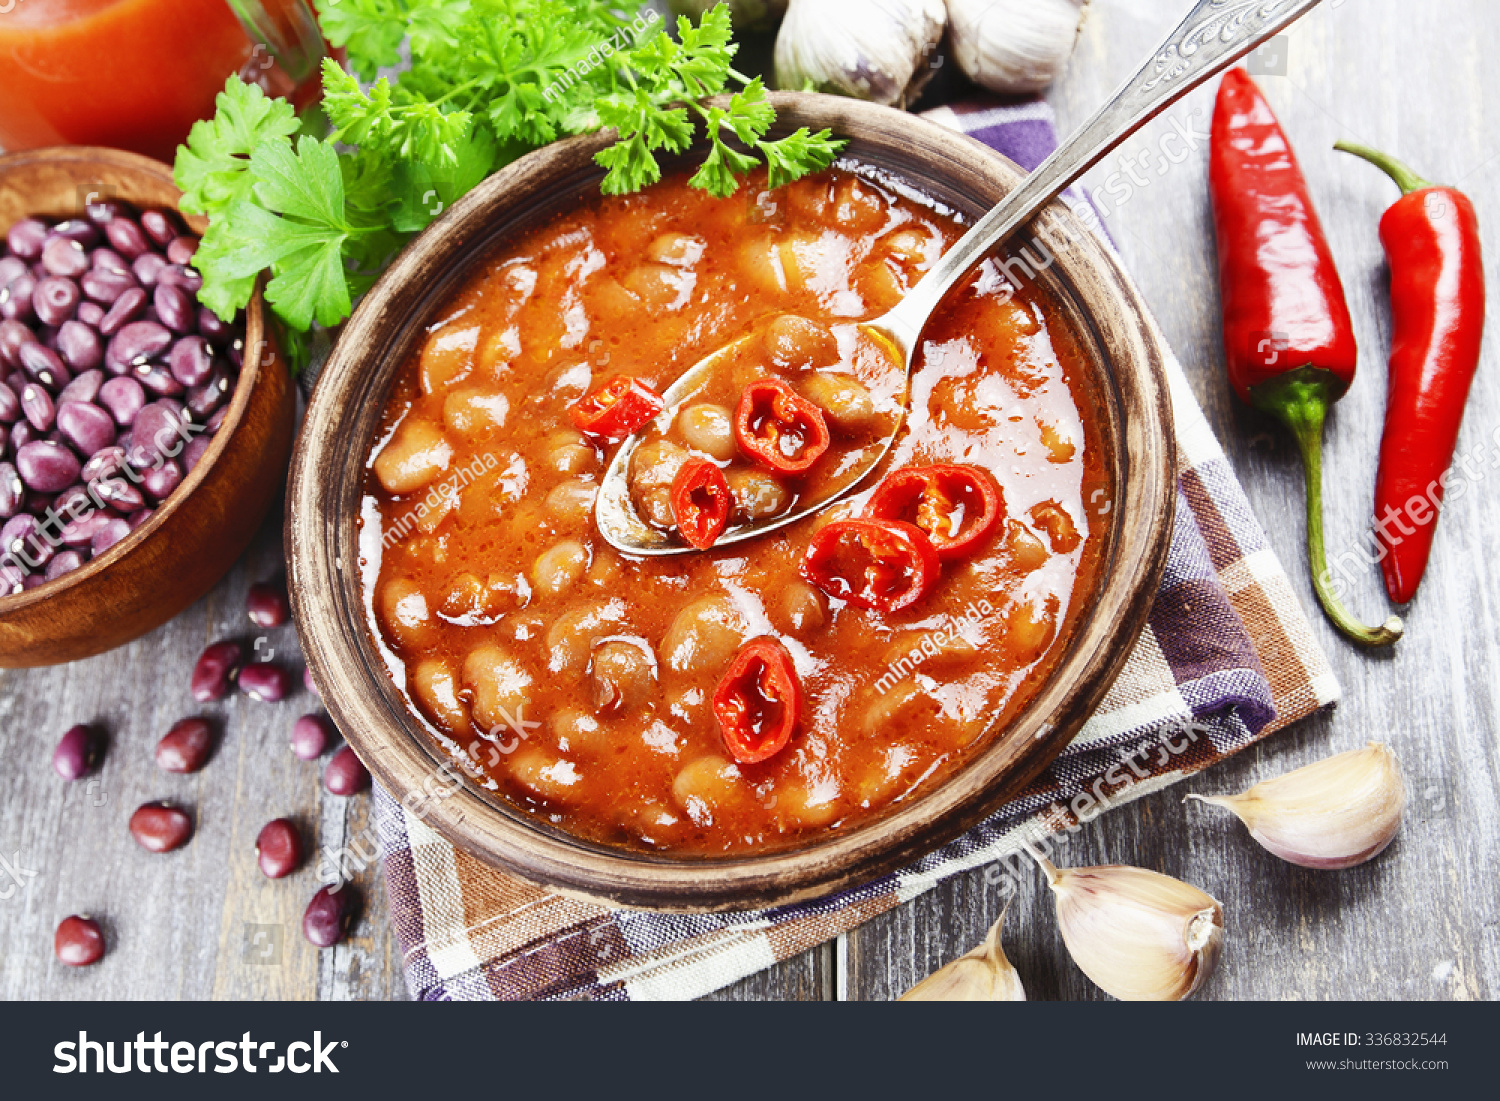 Soup with red bean and chili pepper #336832544